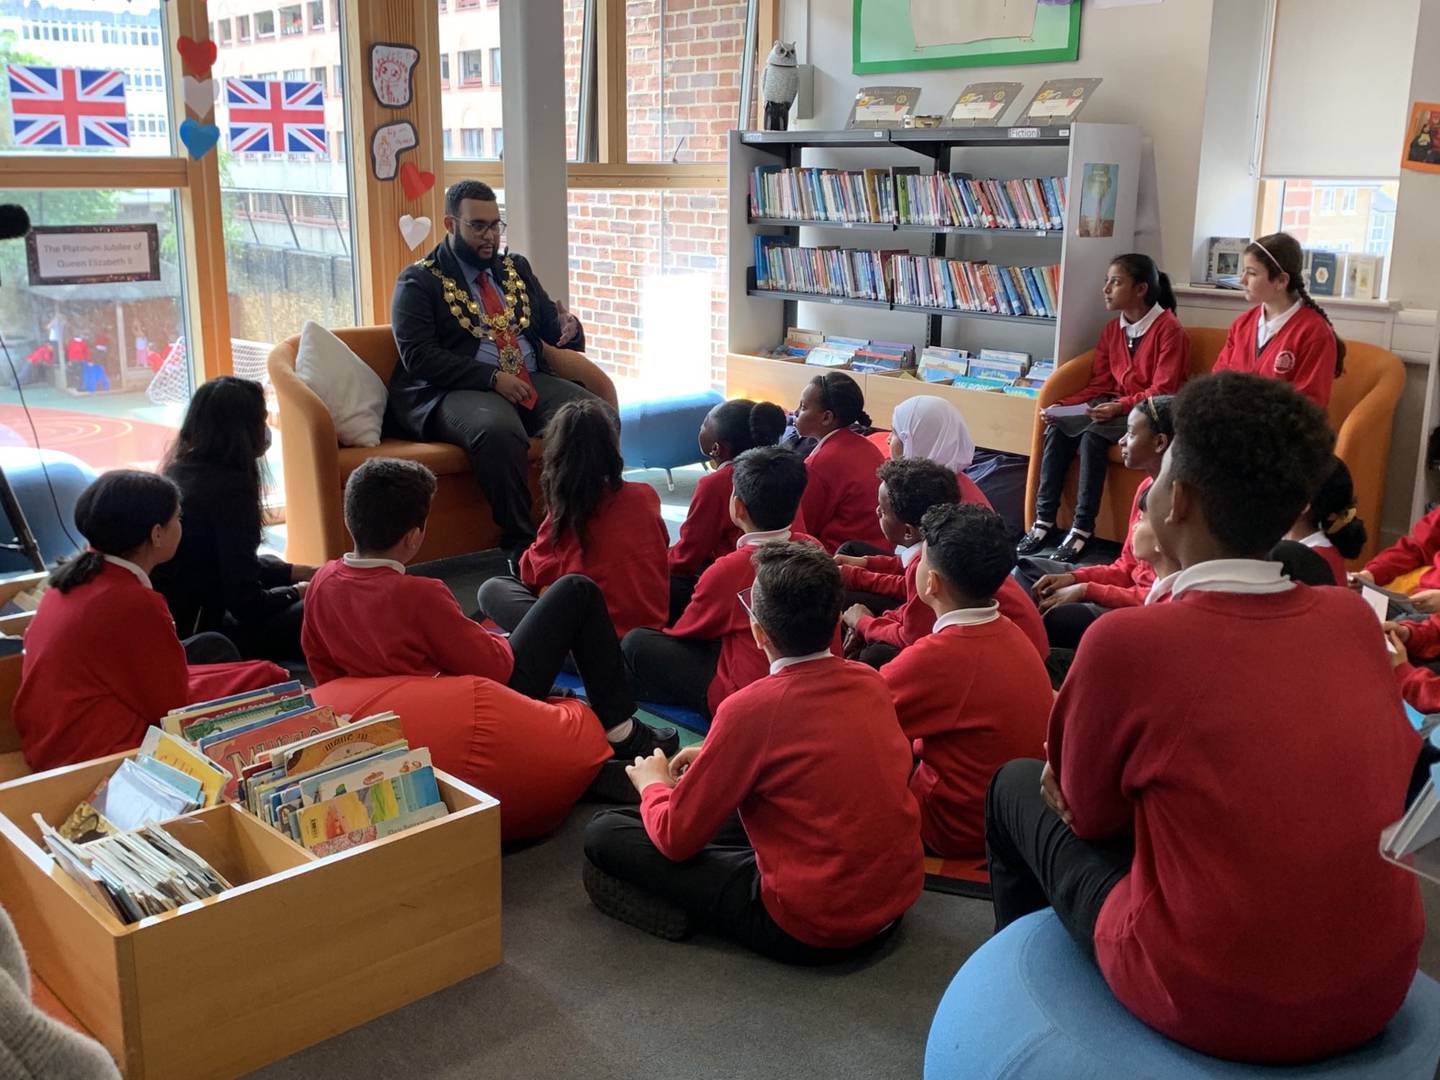 Determined to be a catalyst to improve the lives of others, especially the young, Taouzzale started as he meant to go on by making his first engagement a visit to his old primary school, Gateway Academy. Photo: Westminster City Council